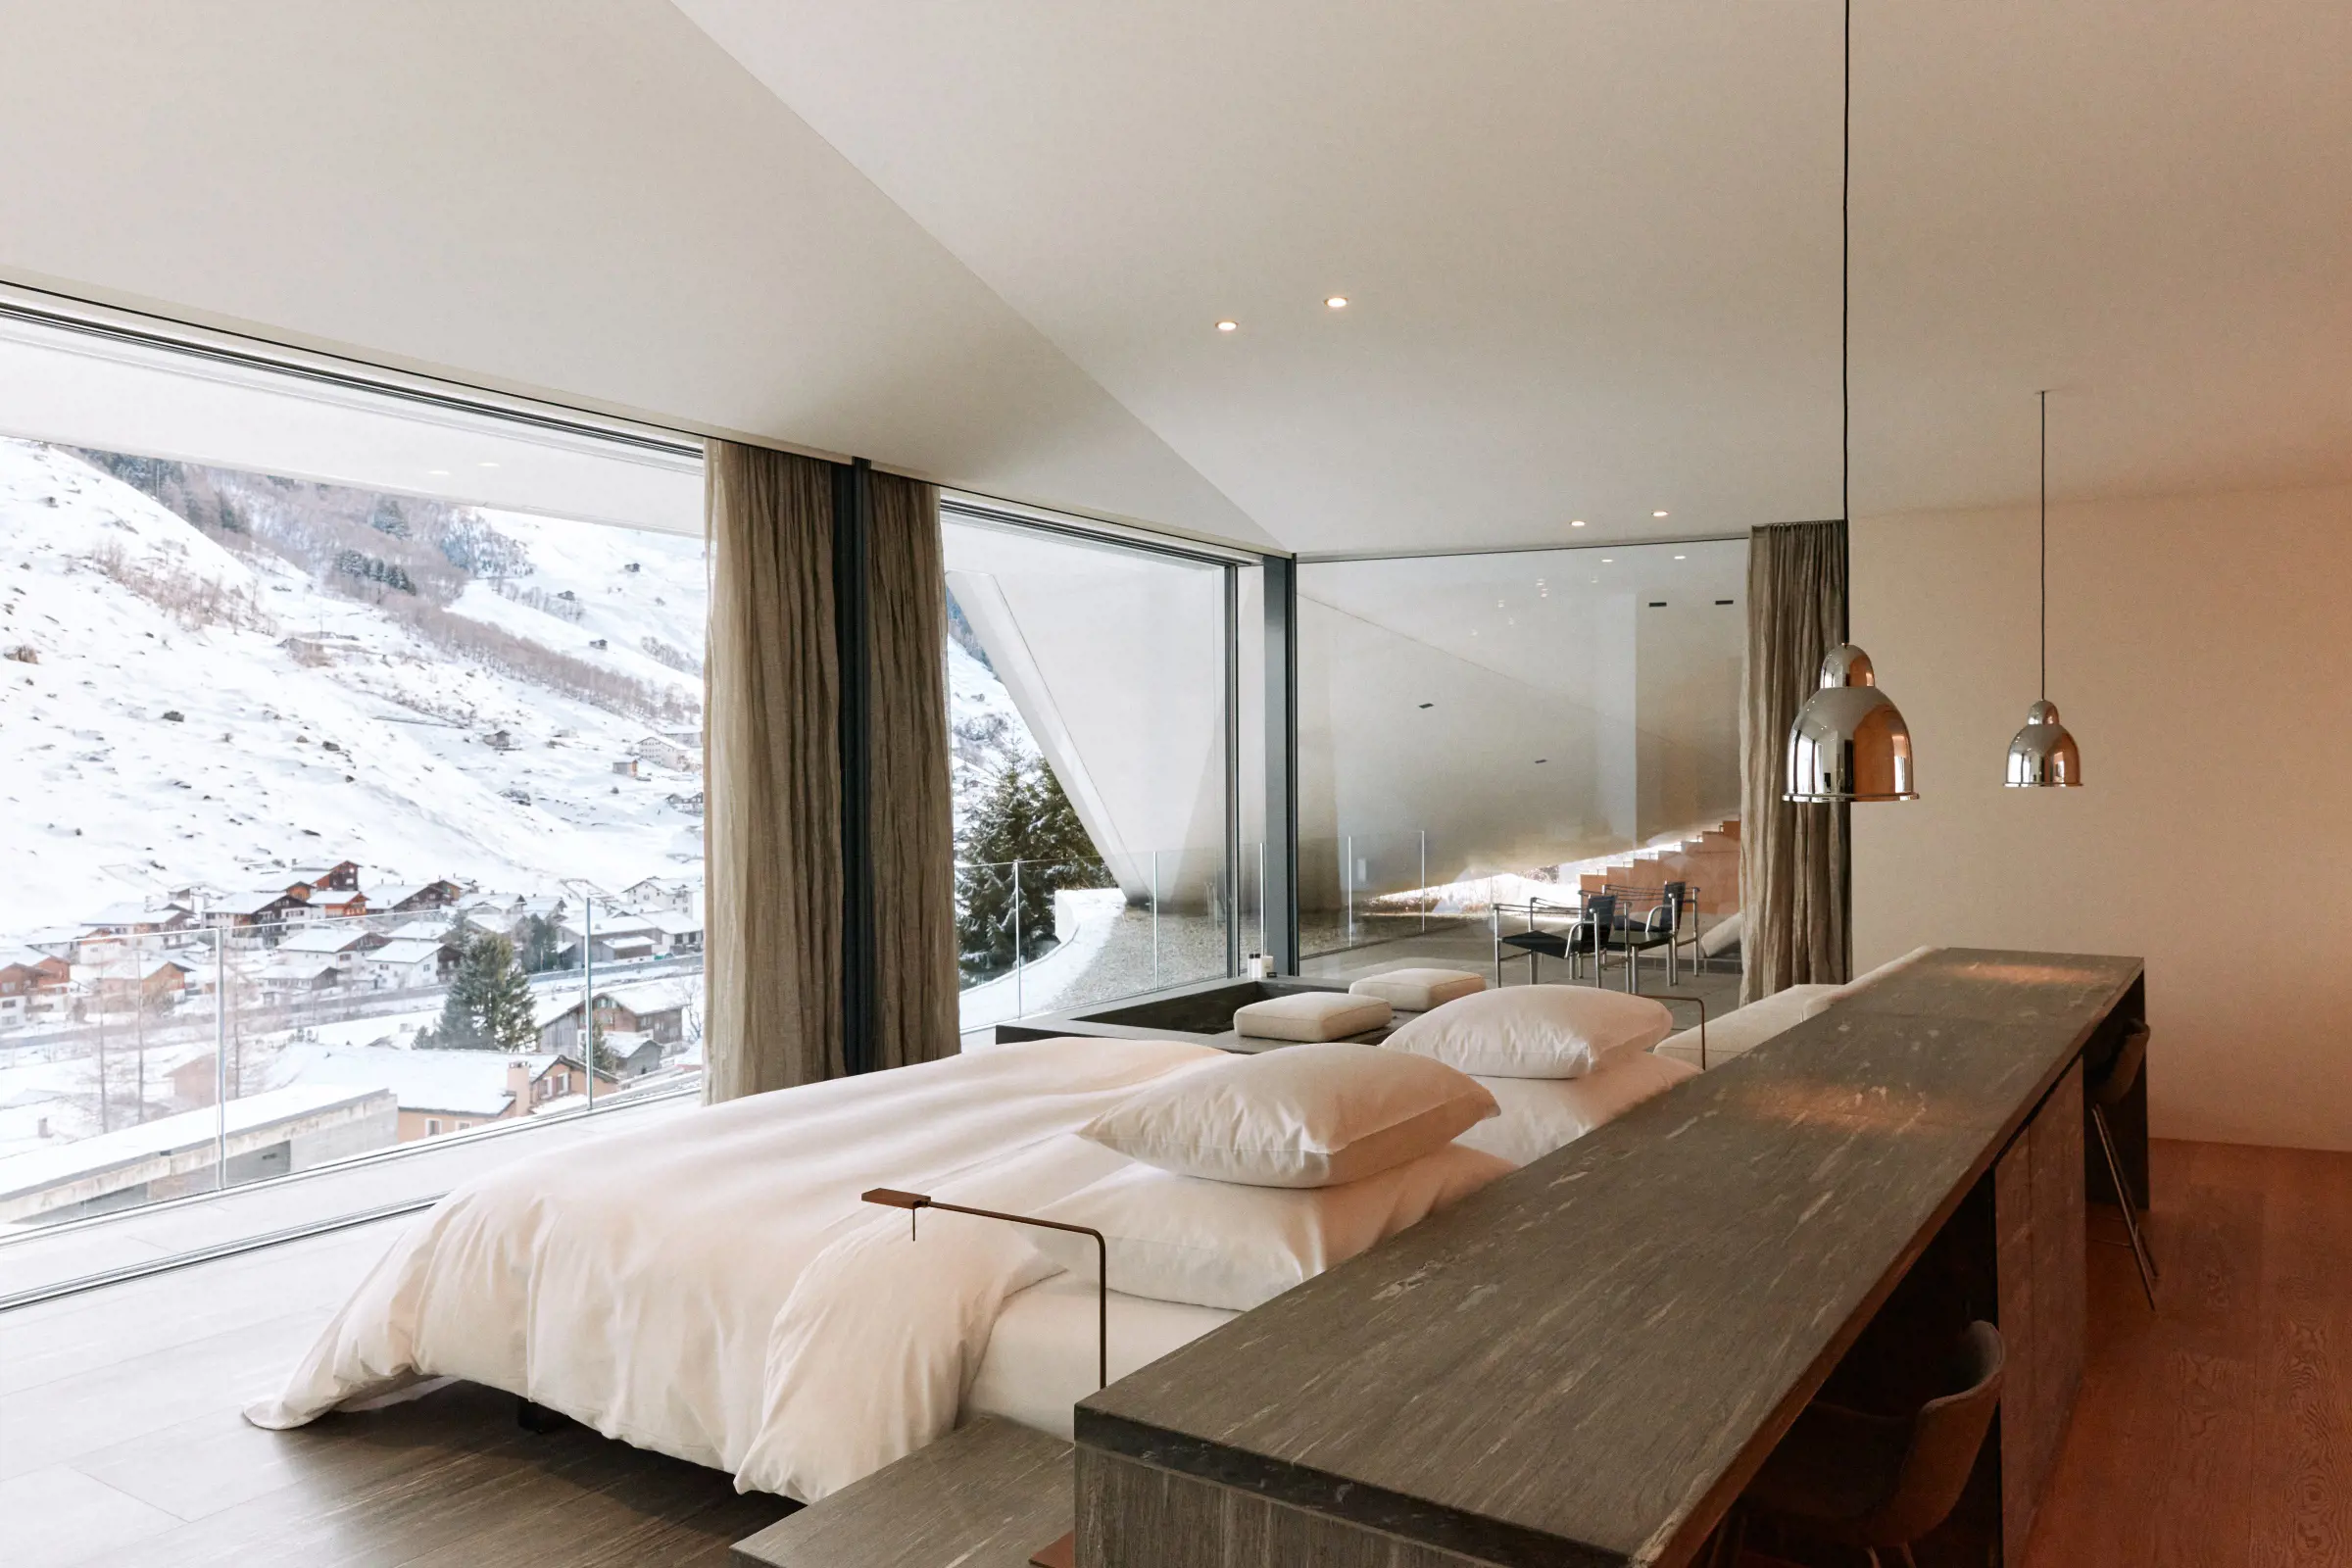 7132 Hotel Scenic Retreats Vals Hotel 5S Penthouse 20230116 357A8874